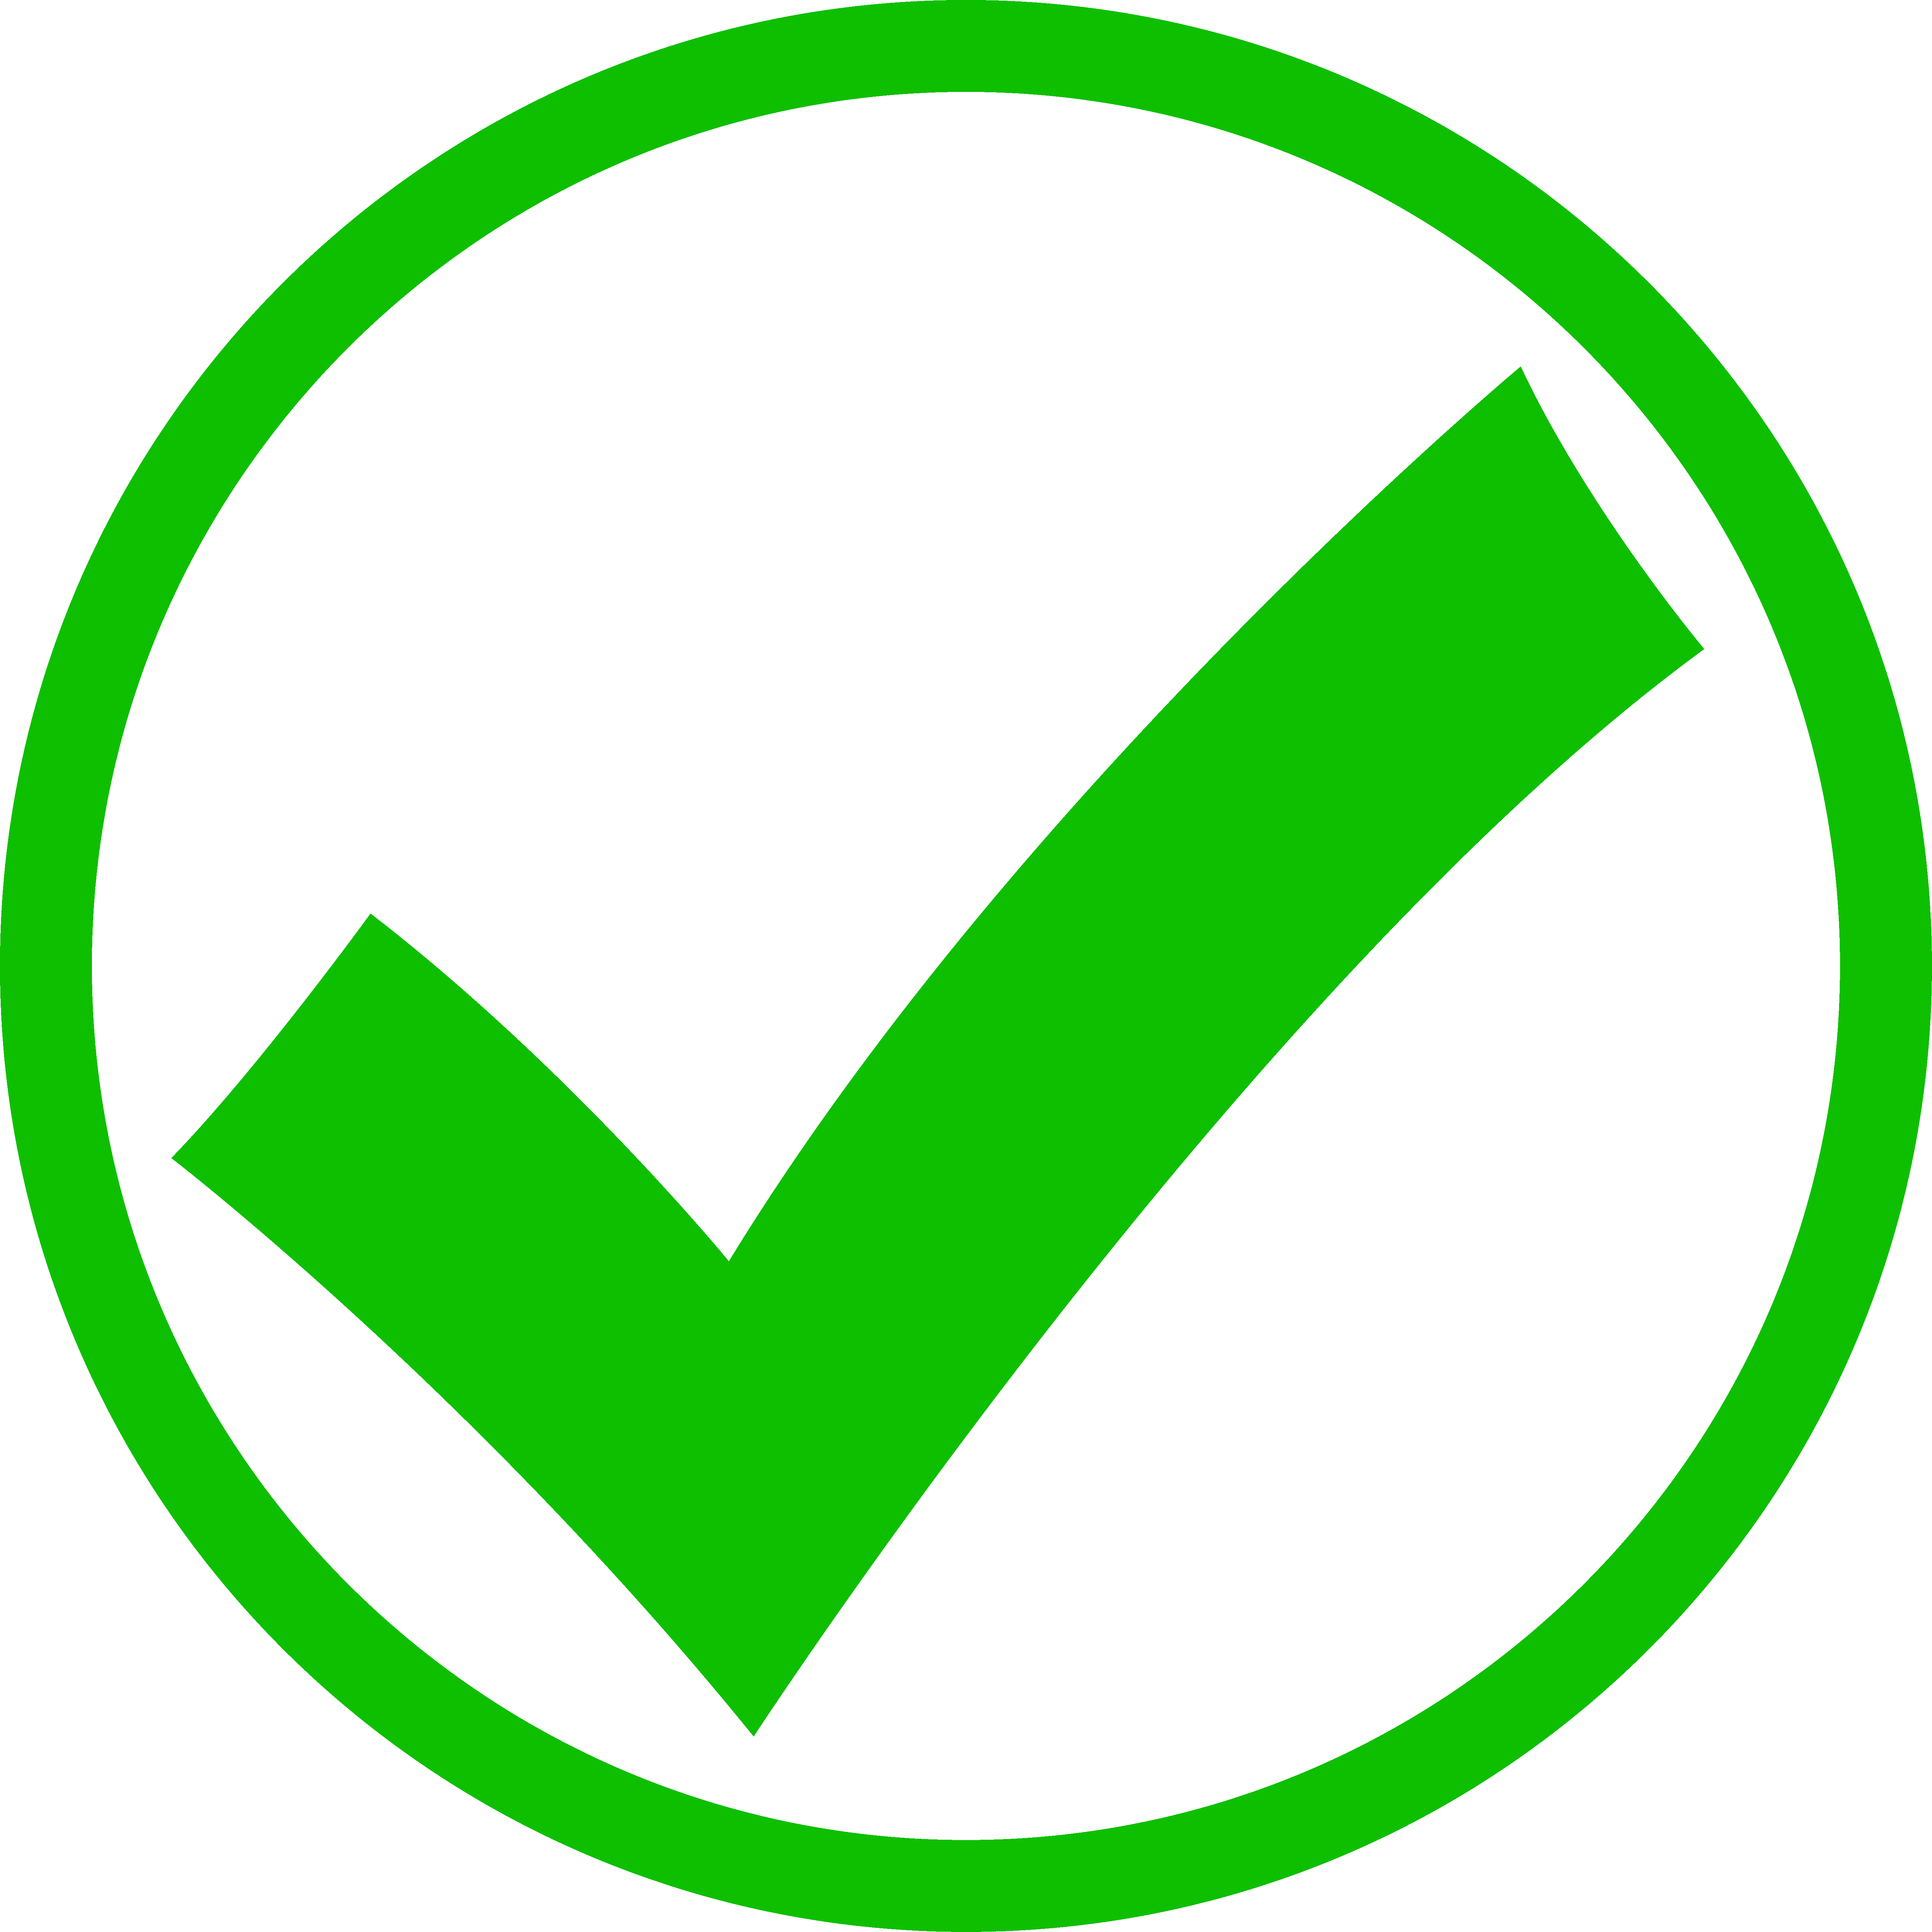 Green Check Mark In Circle Download Png Clipart